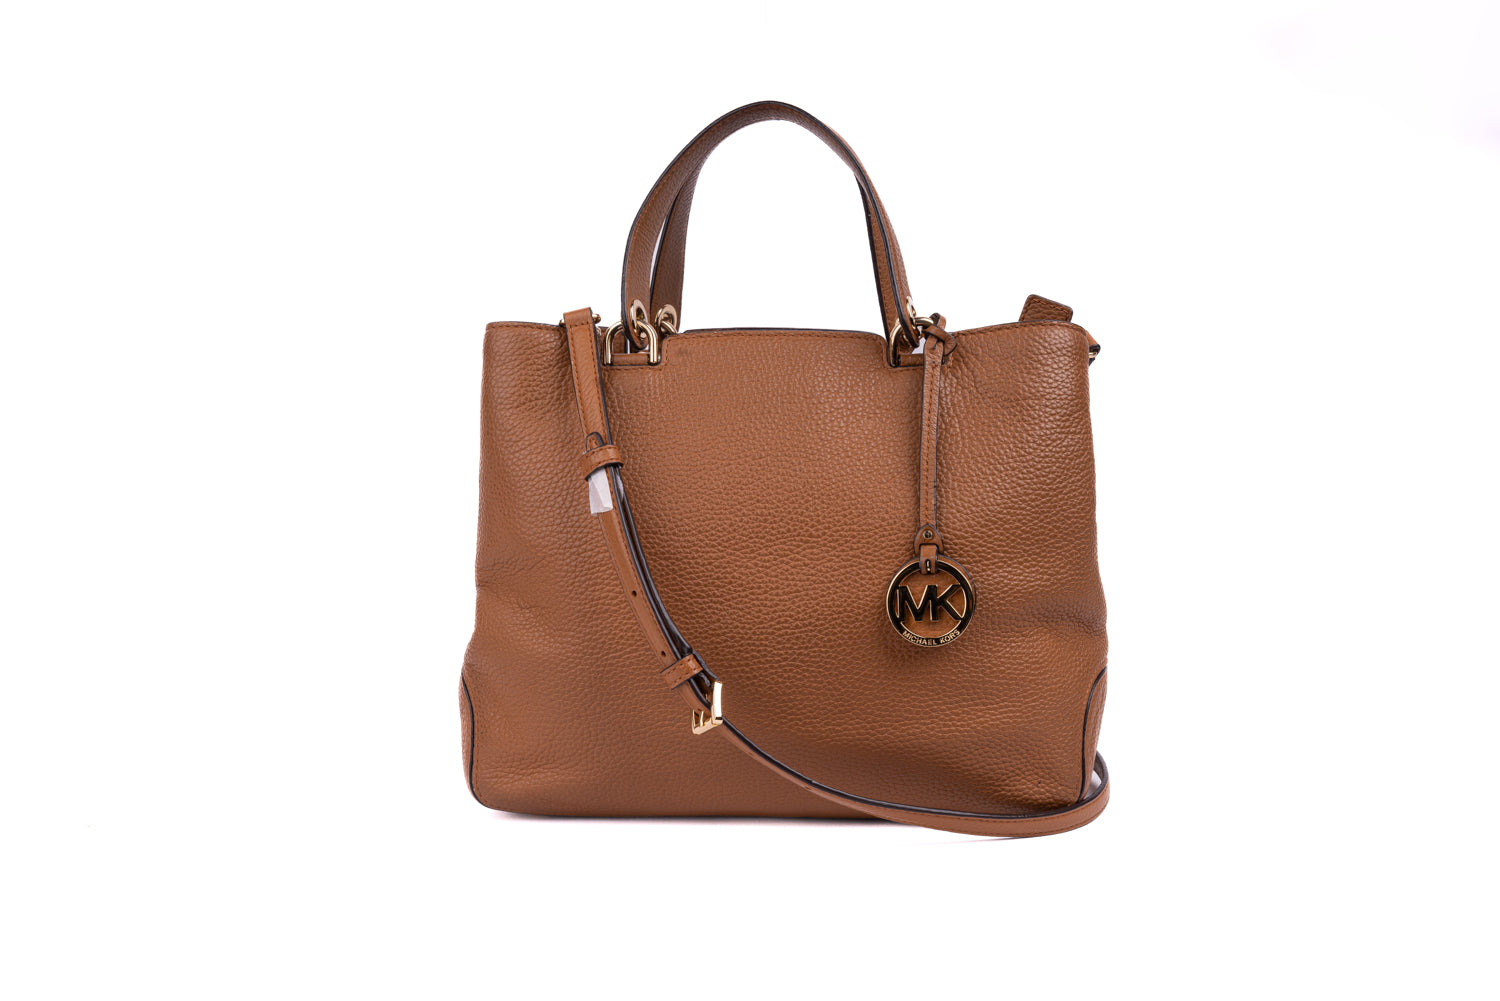 Michael Kors Brown Anabelle Leather Tote Bag